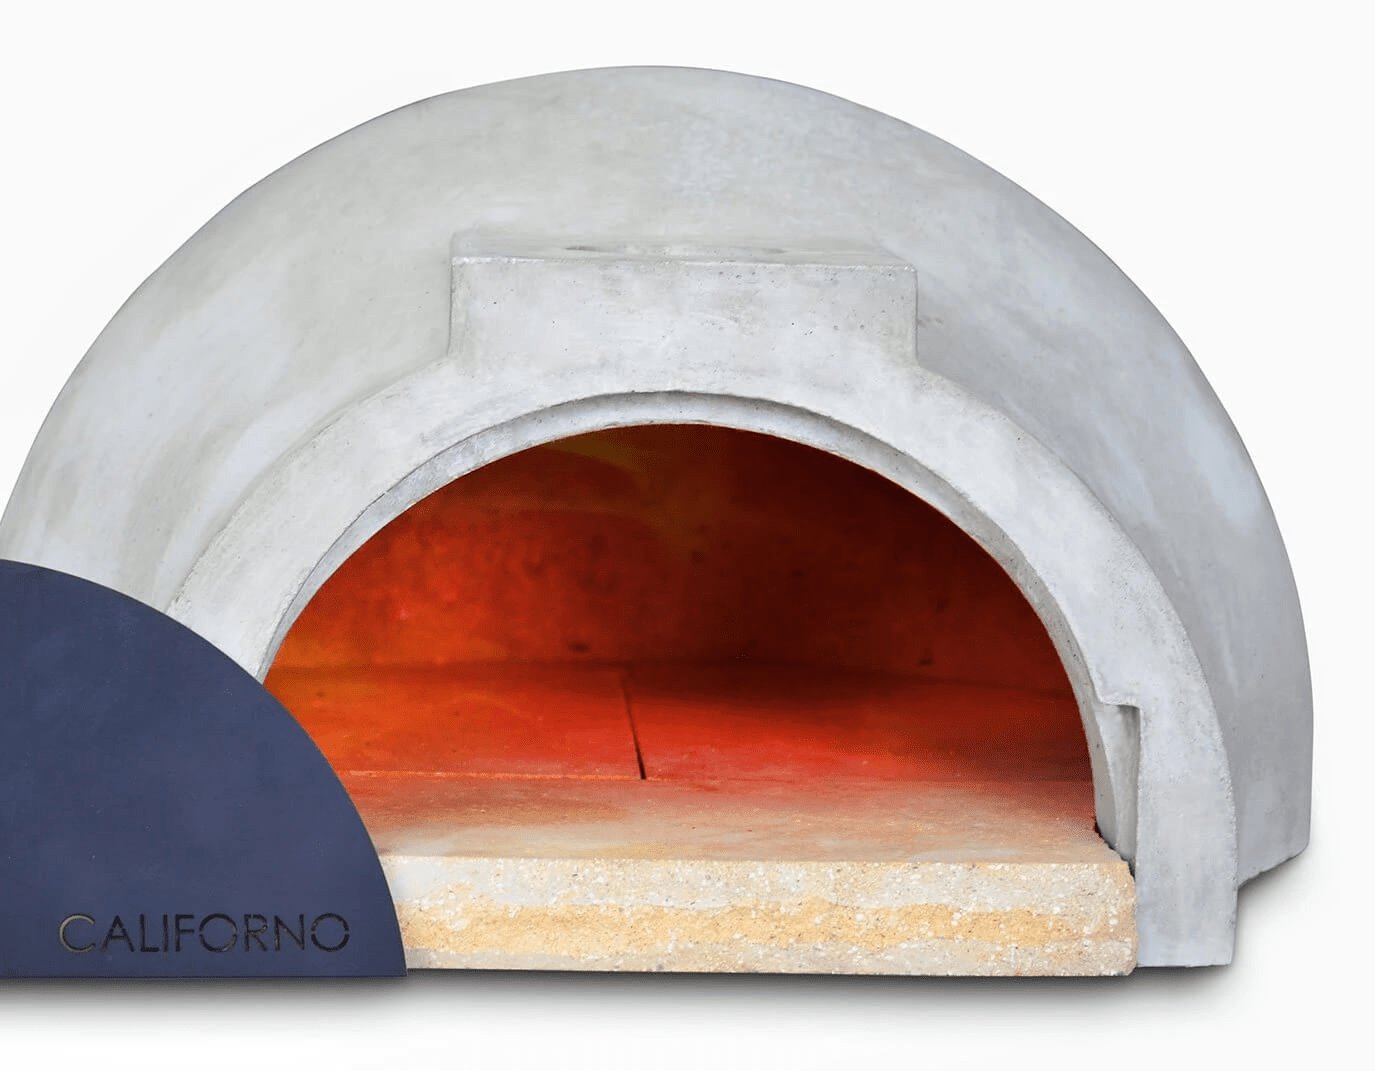 Pizza oven accessories, free your creativity